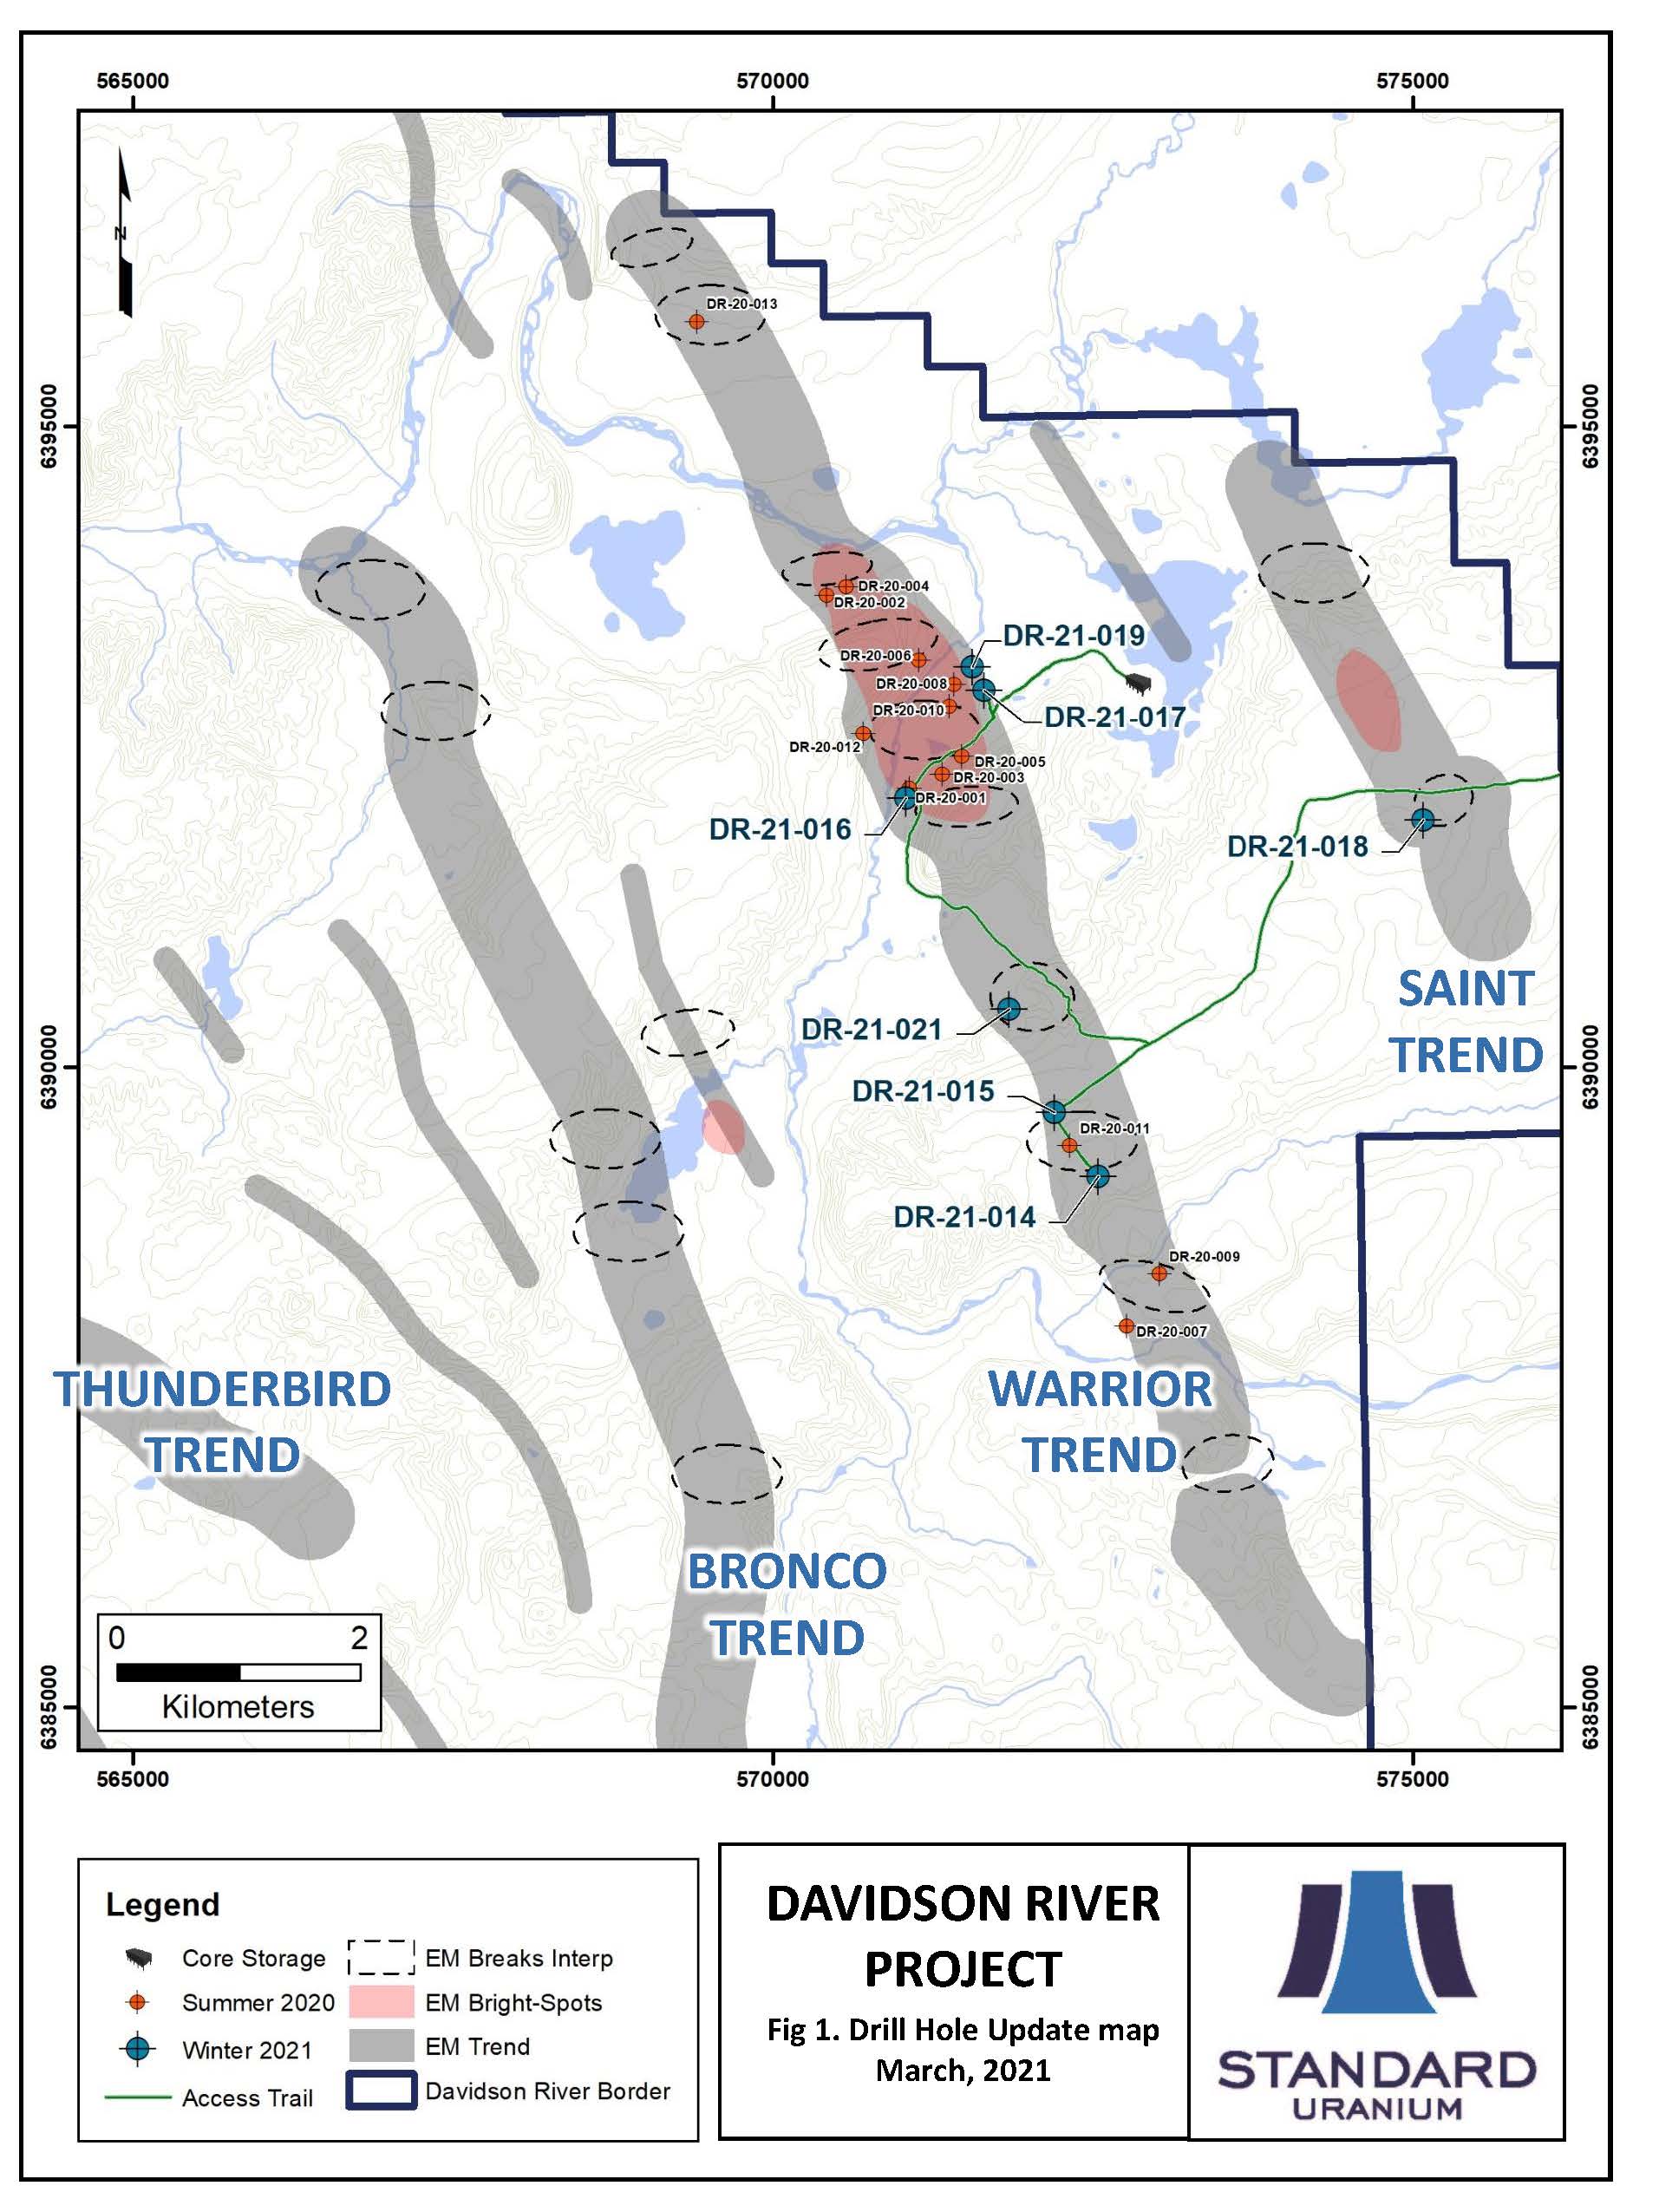 Davidson River Drill Hole Update Map March 2021